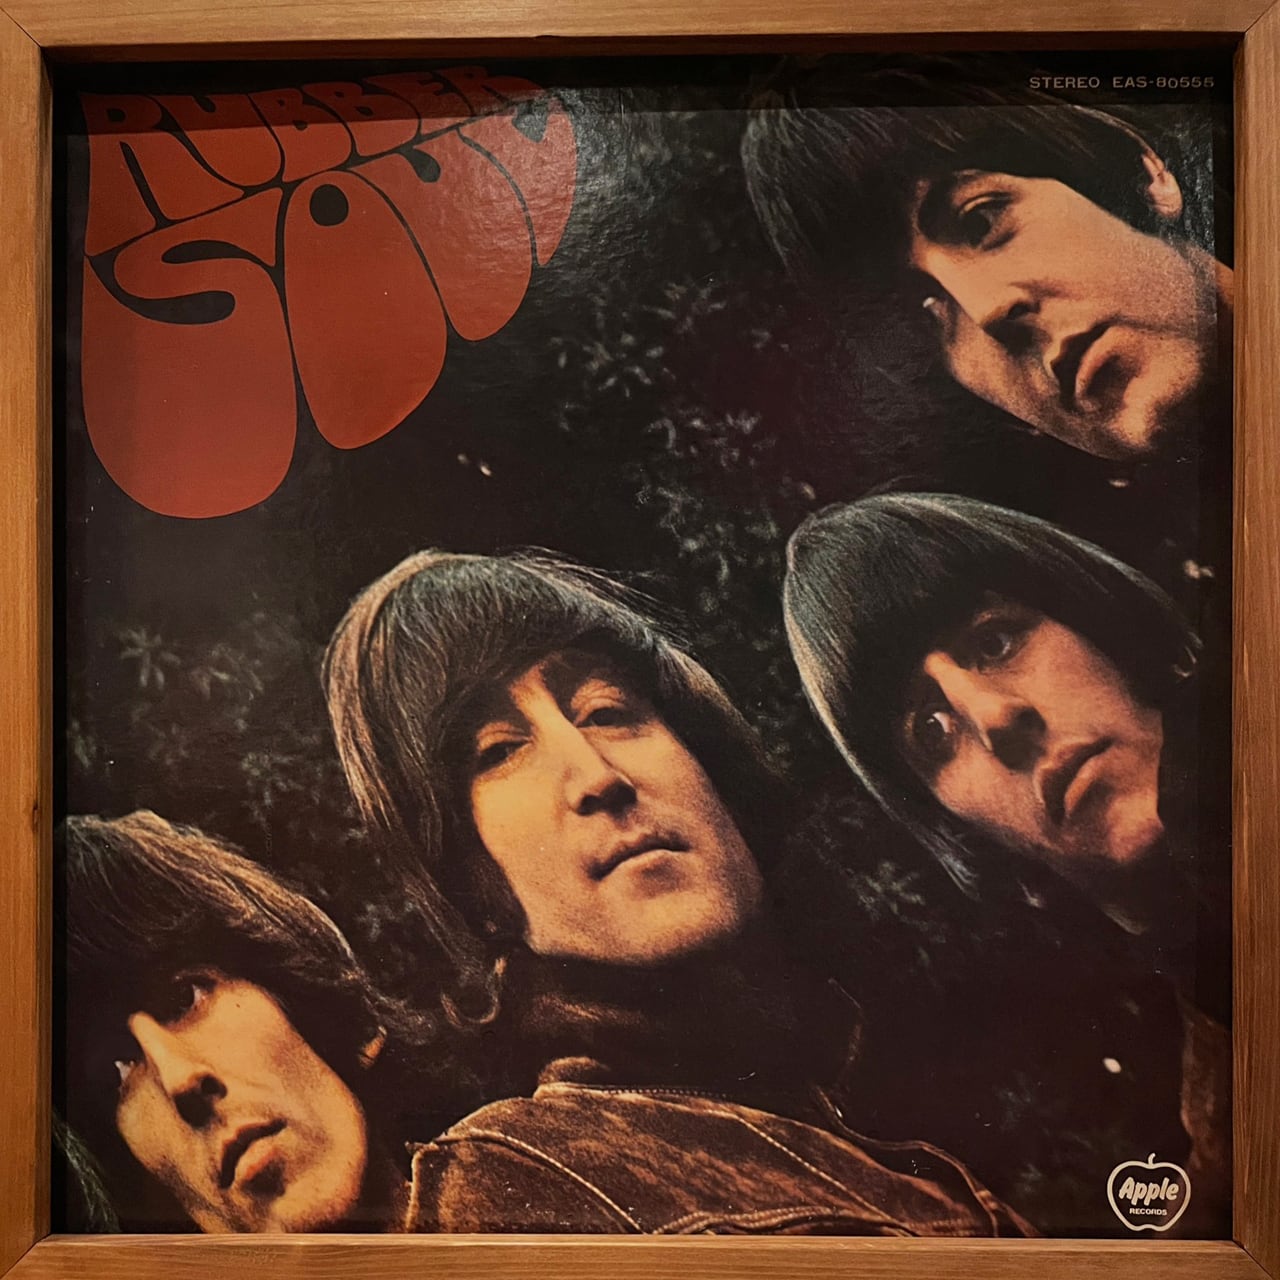 The Beatles – Rubber Soul (LP) Underground Gallery Record Store